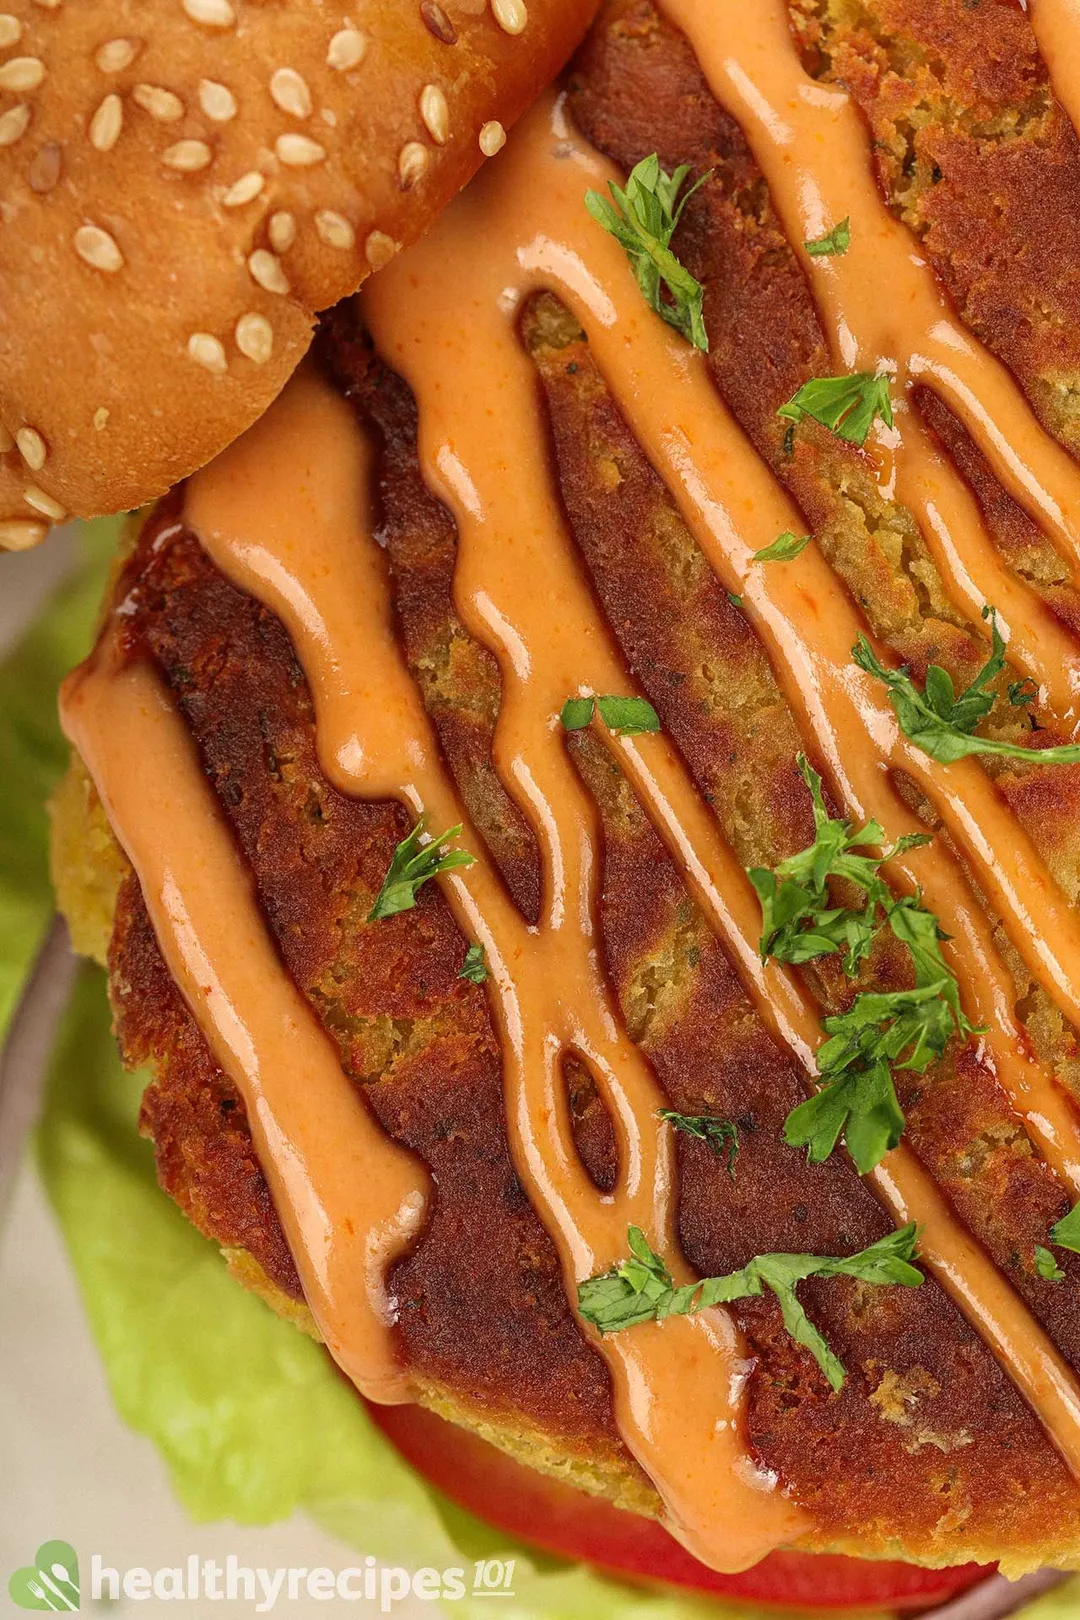 A close-up shot of a chickpea pattie drizzled with an orange sauce and garnished with chopped parsley.